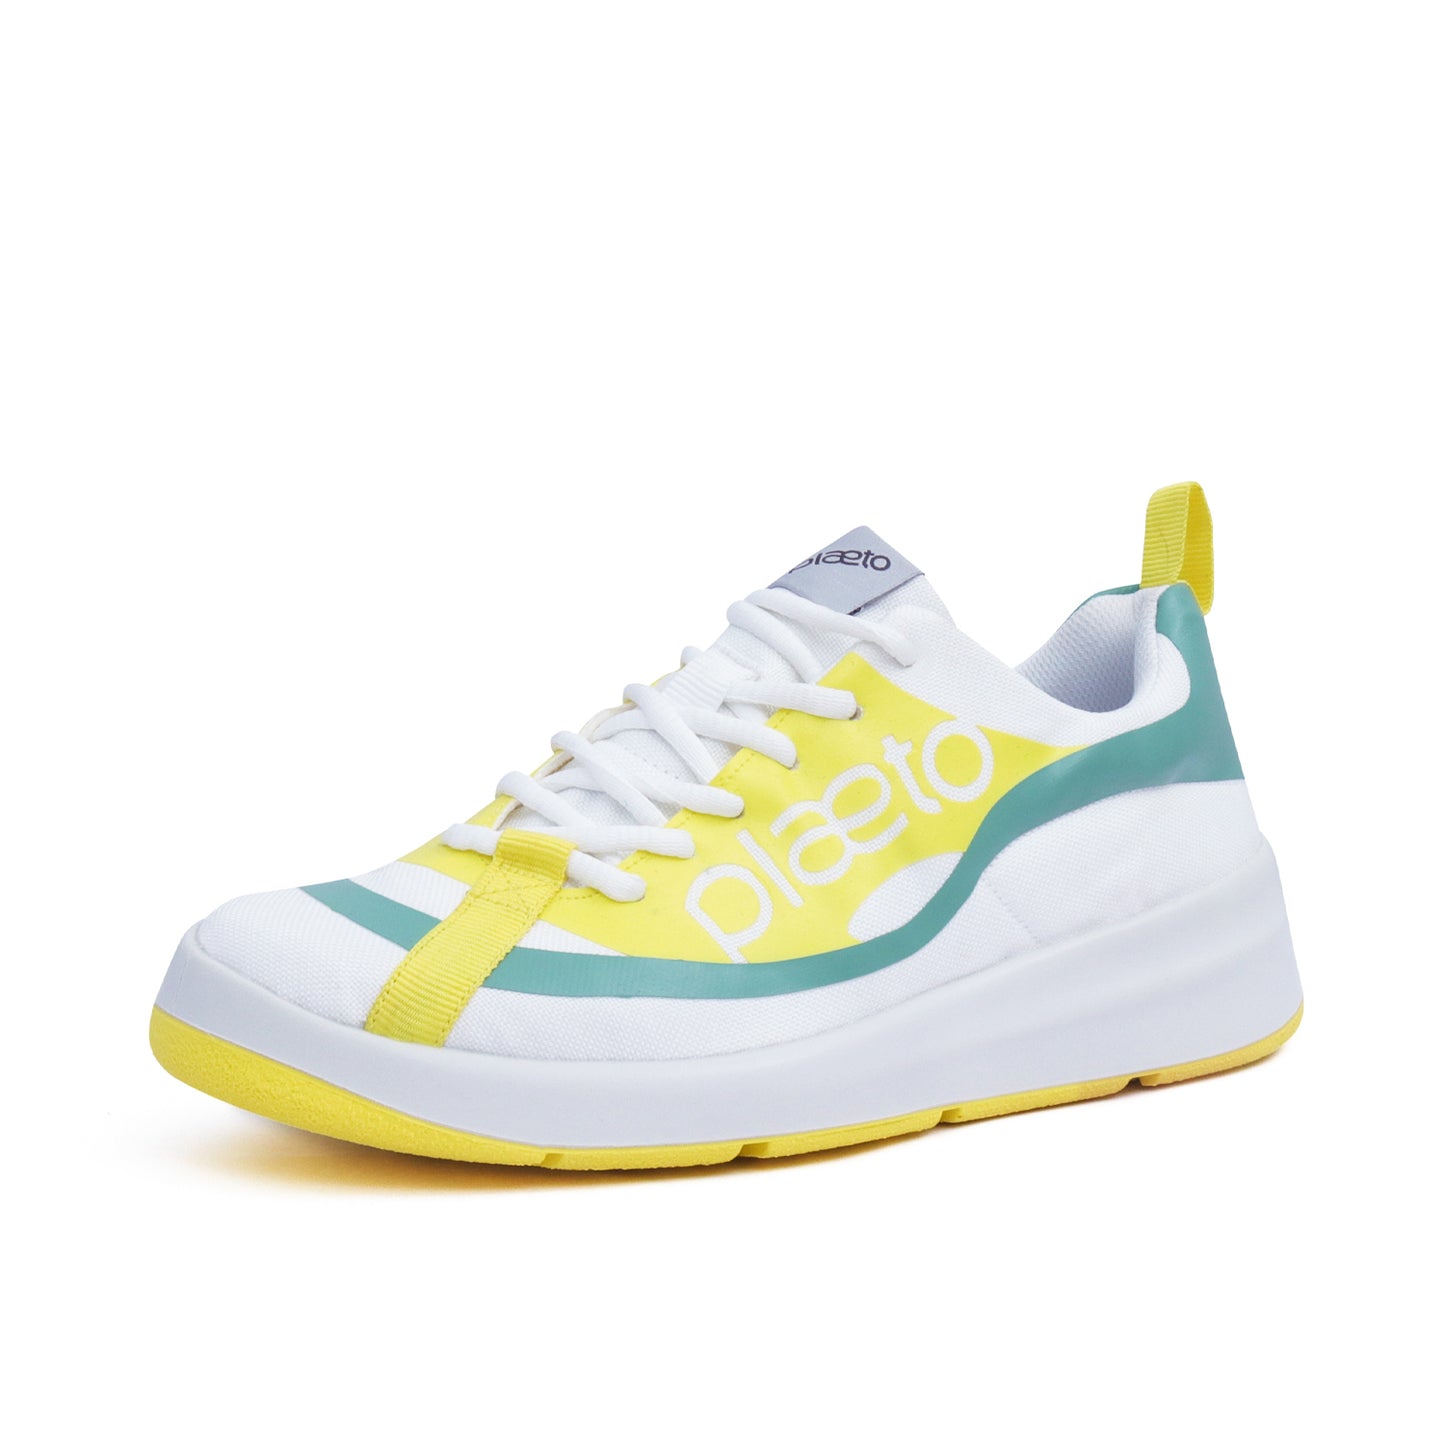 Ignite Men's Multiplay Sports Shoes - White / Yellow